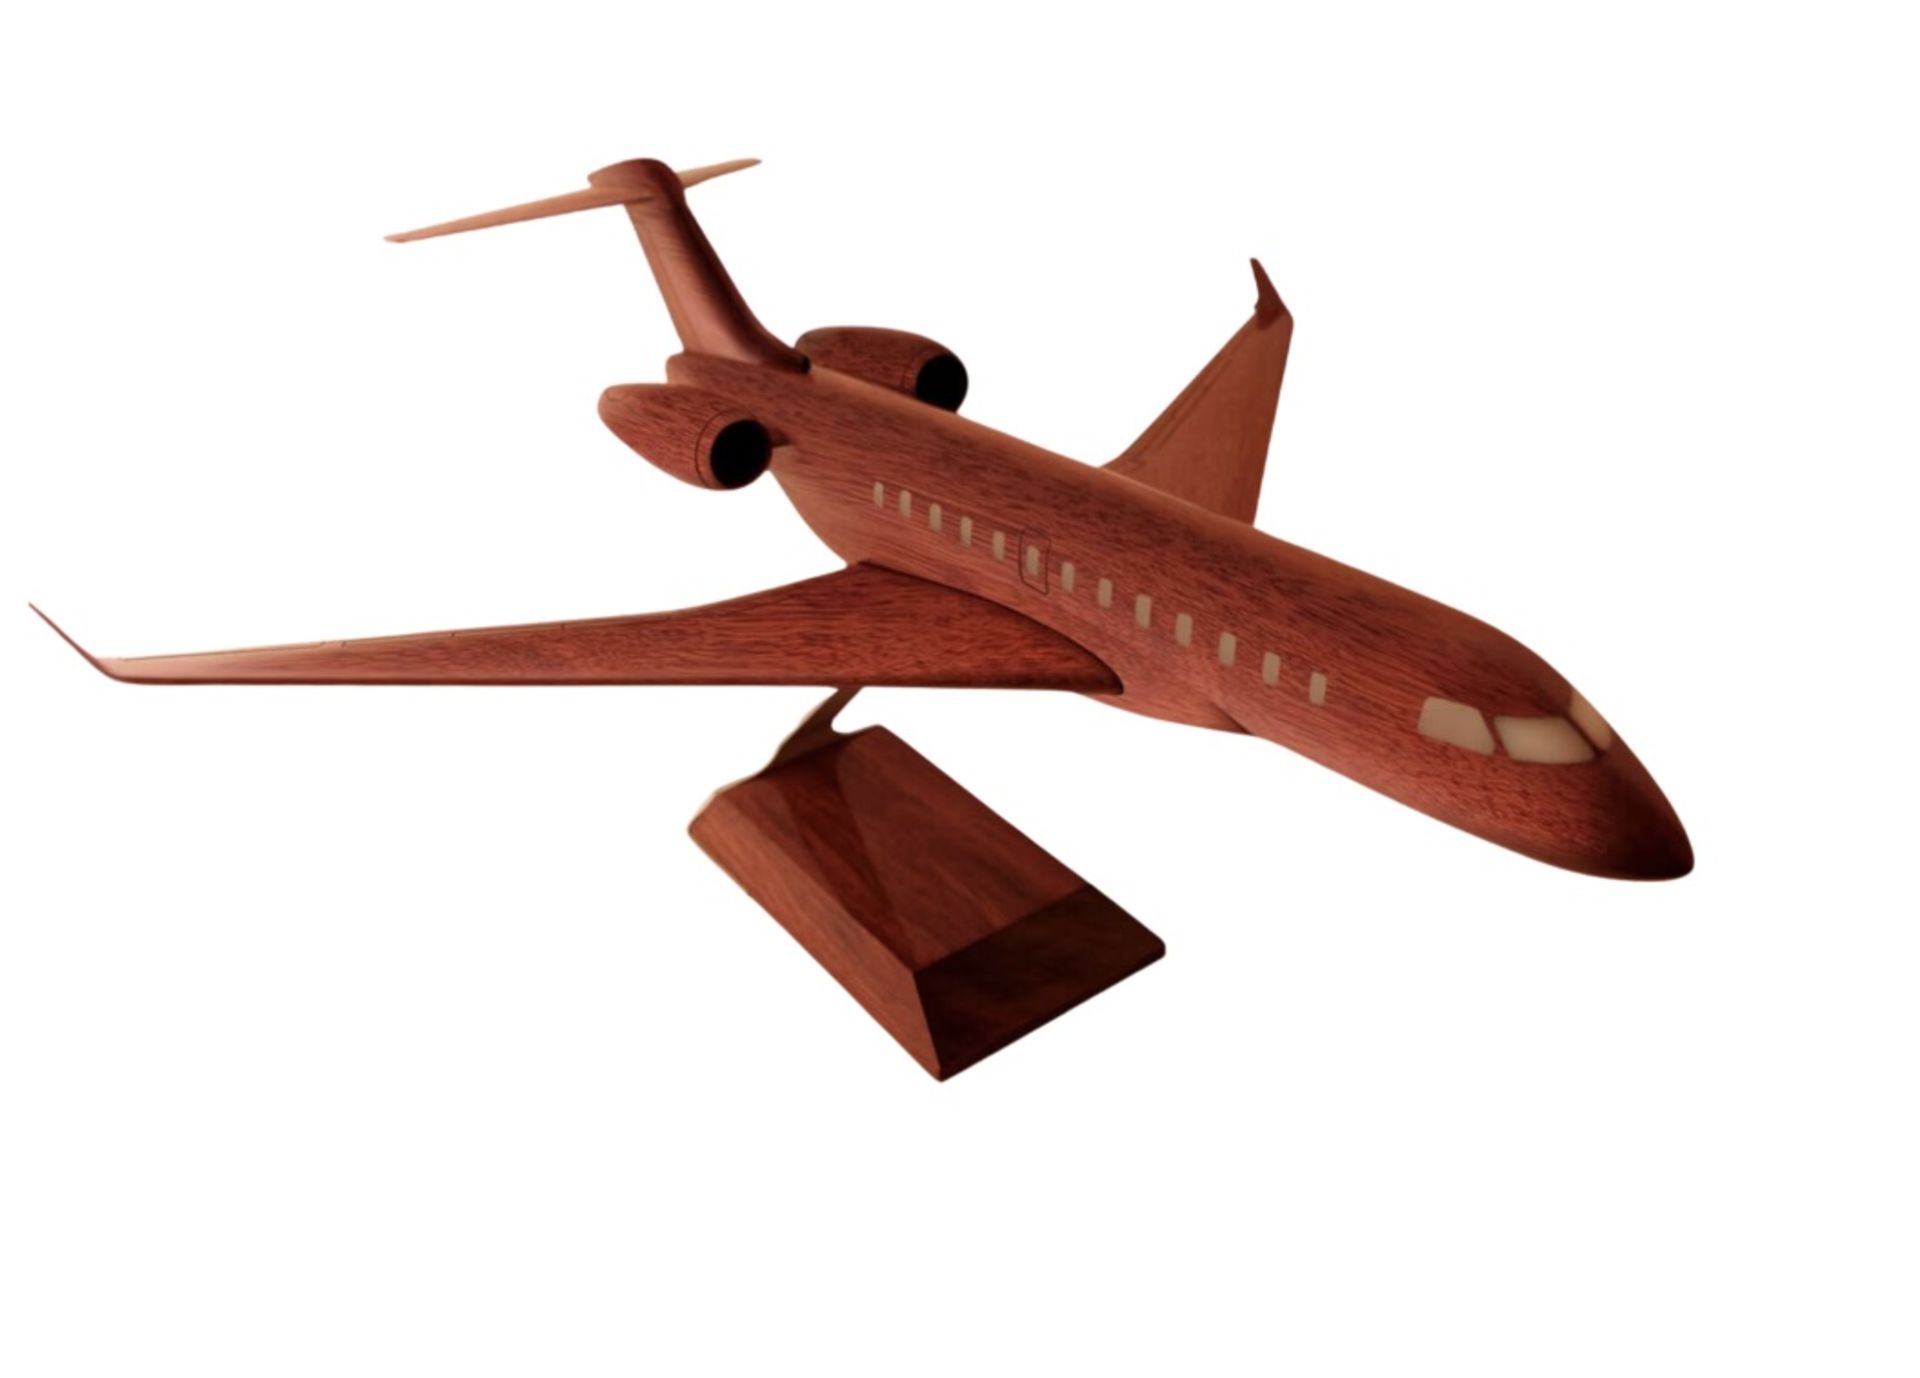 Bombardier Global 8500 Wooden Scale Display Model - Image 7 of 7